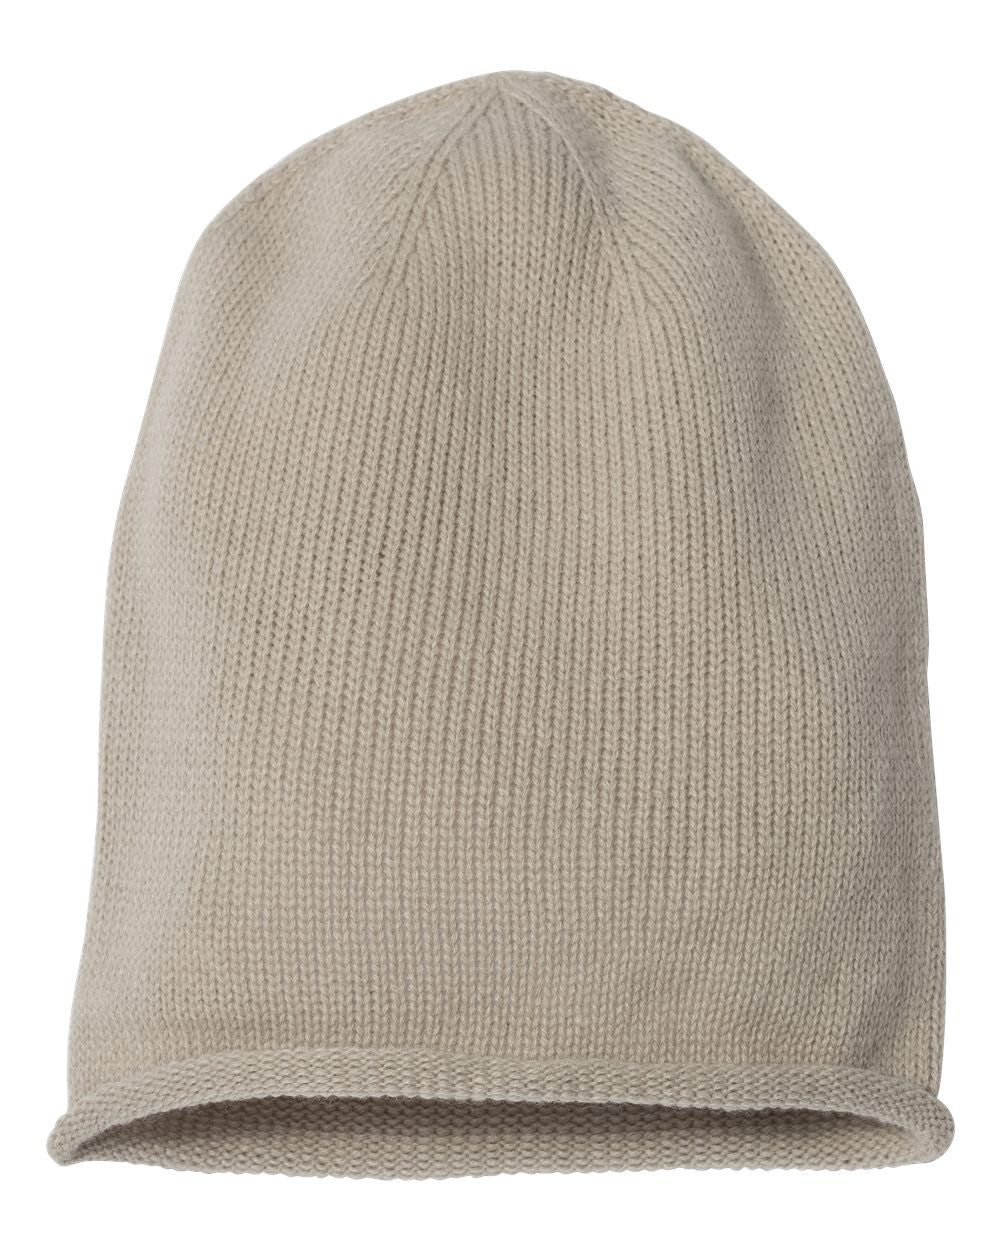 Fifty5 Clothing Super Soft Rolled Edge Slouch Beanie 12